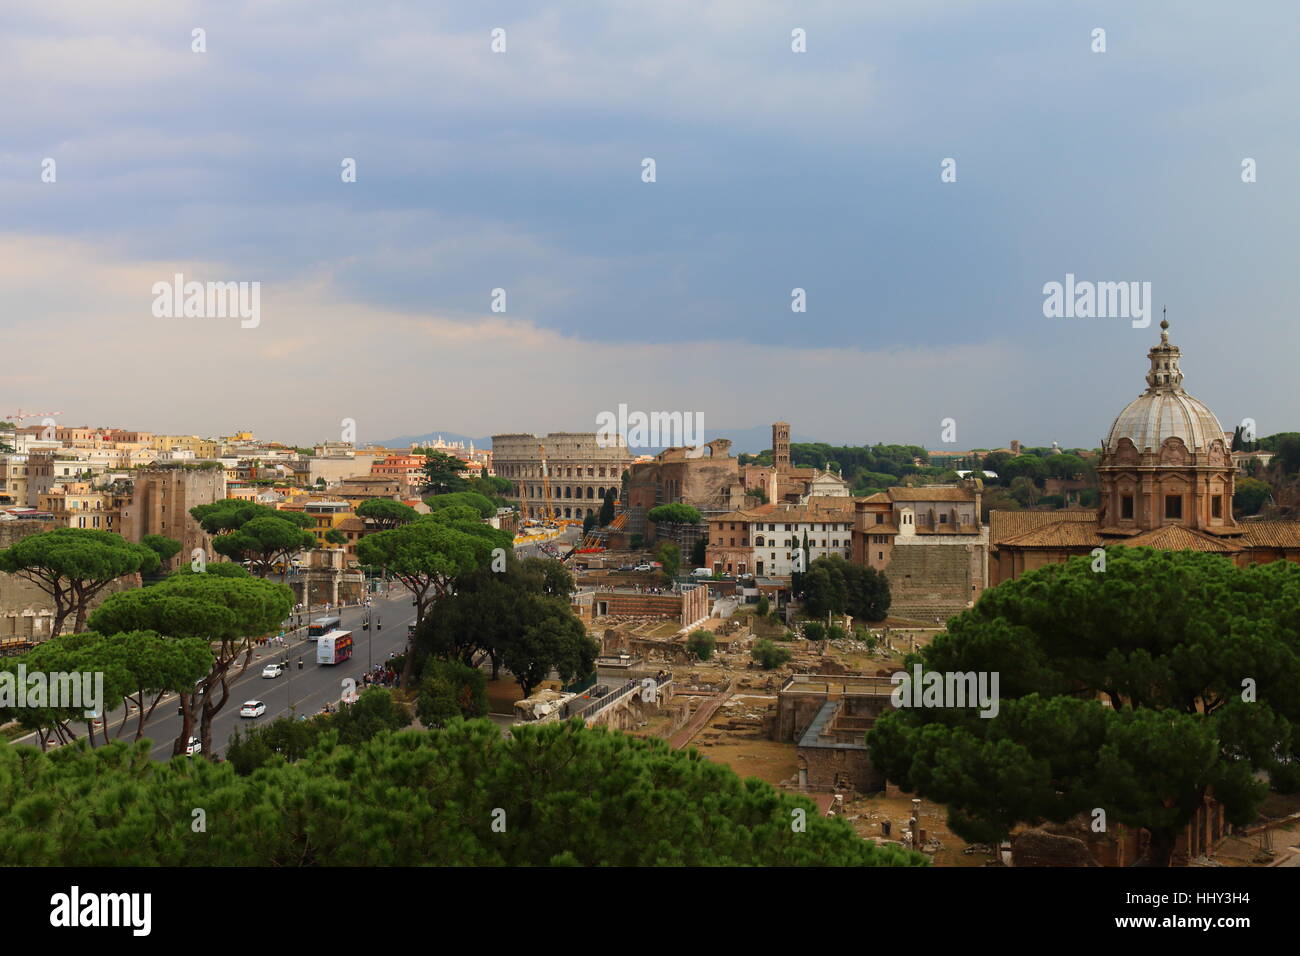 A Rome cityscape, skyline with the Roman Forum and Colosseum in Rome, Italy Stock Photo